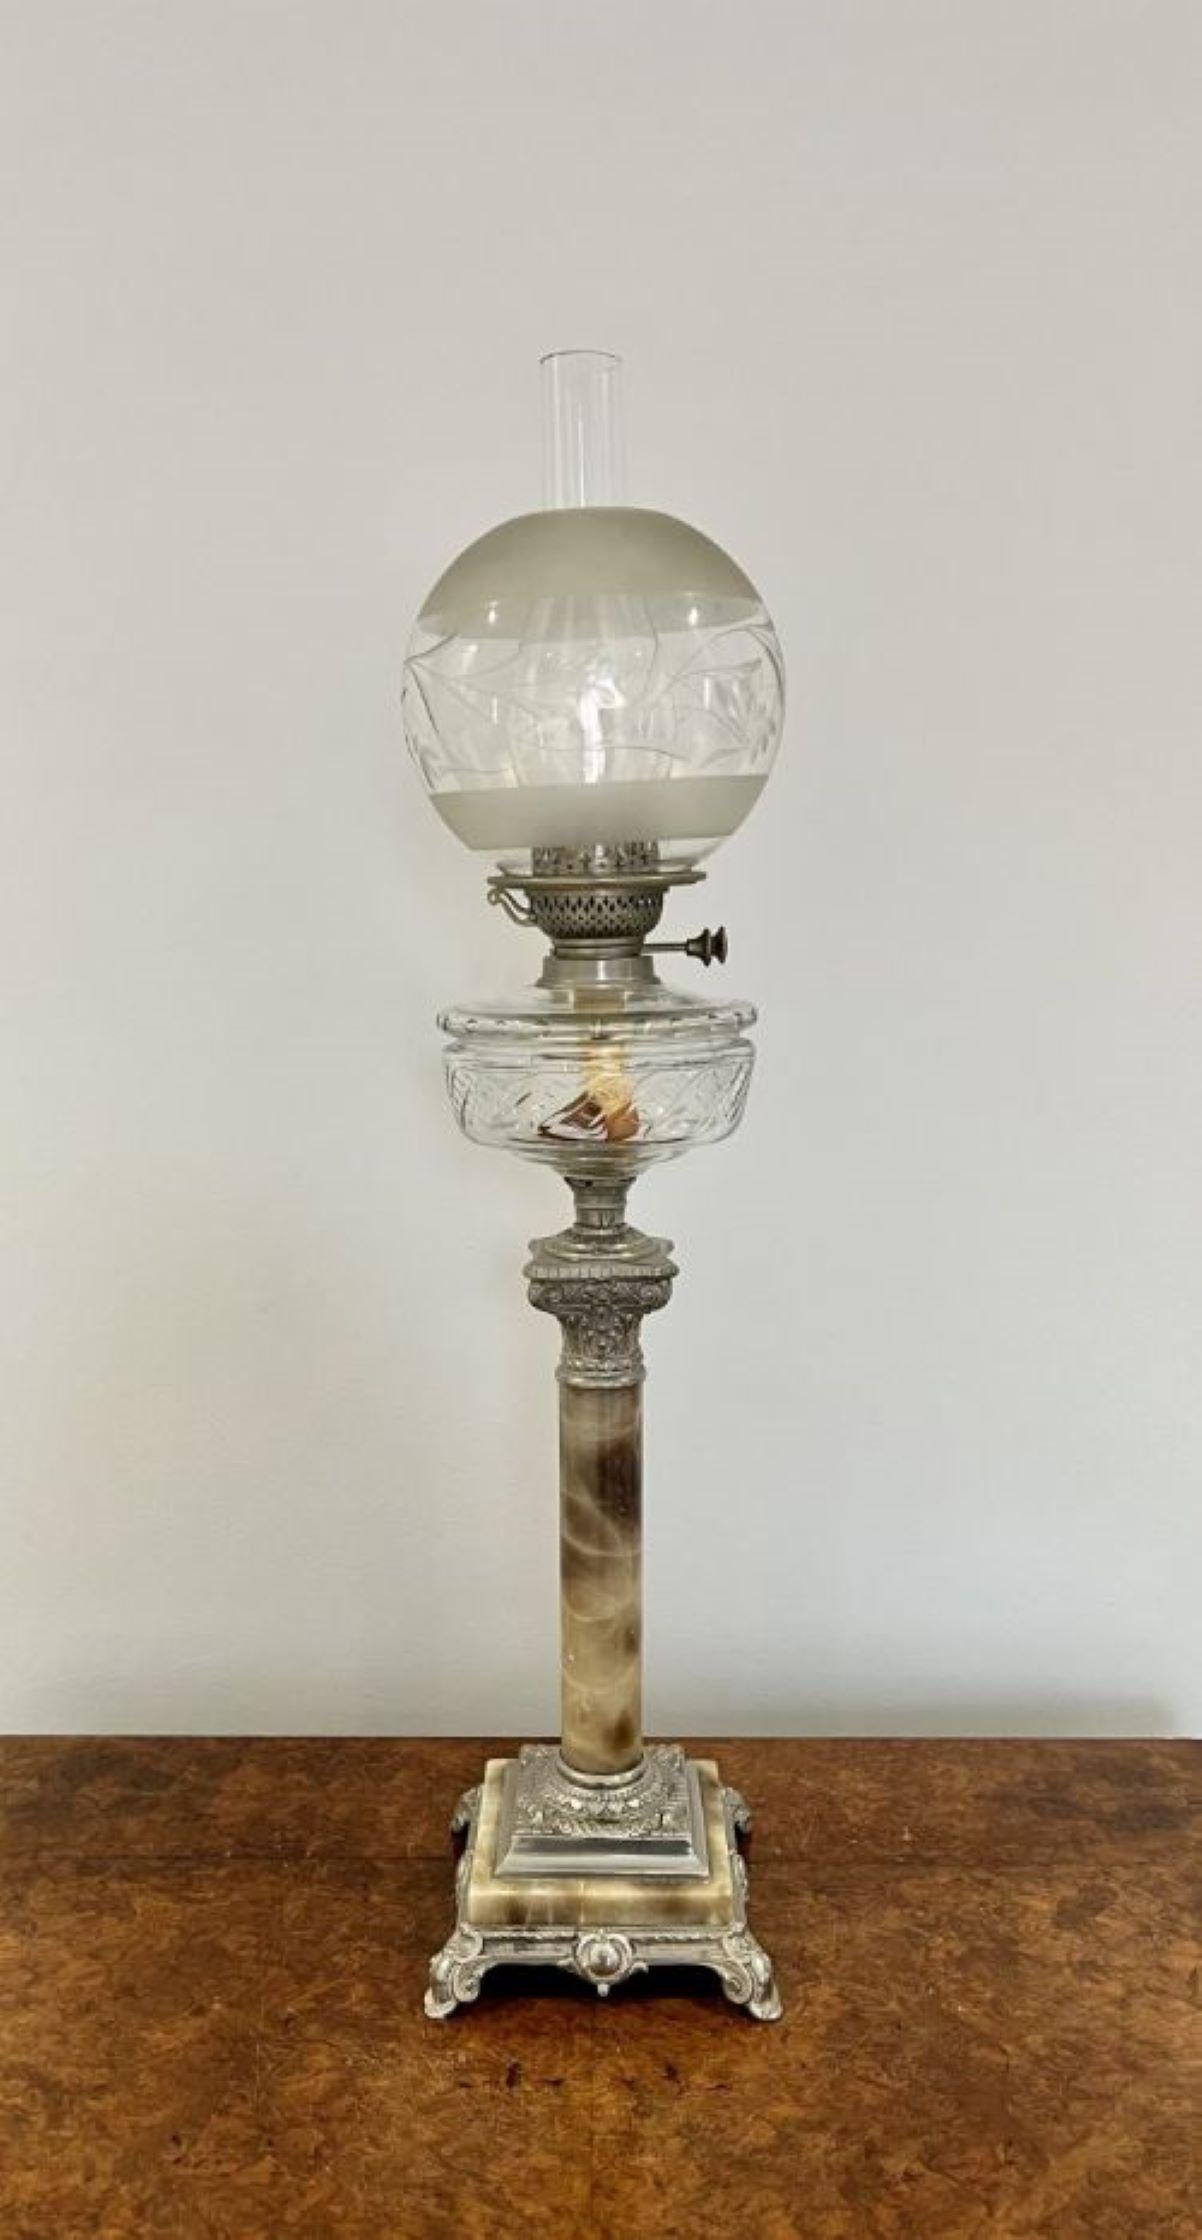 Antique Edwardian quality oil lamp having a quality oil lamp with a globular shade above a clear glass font above a corinthian capital column with base metal standing on an ornate stepped square base with scroll feet